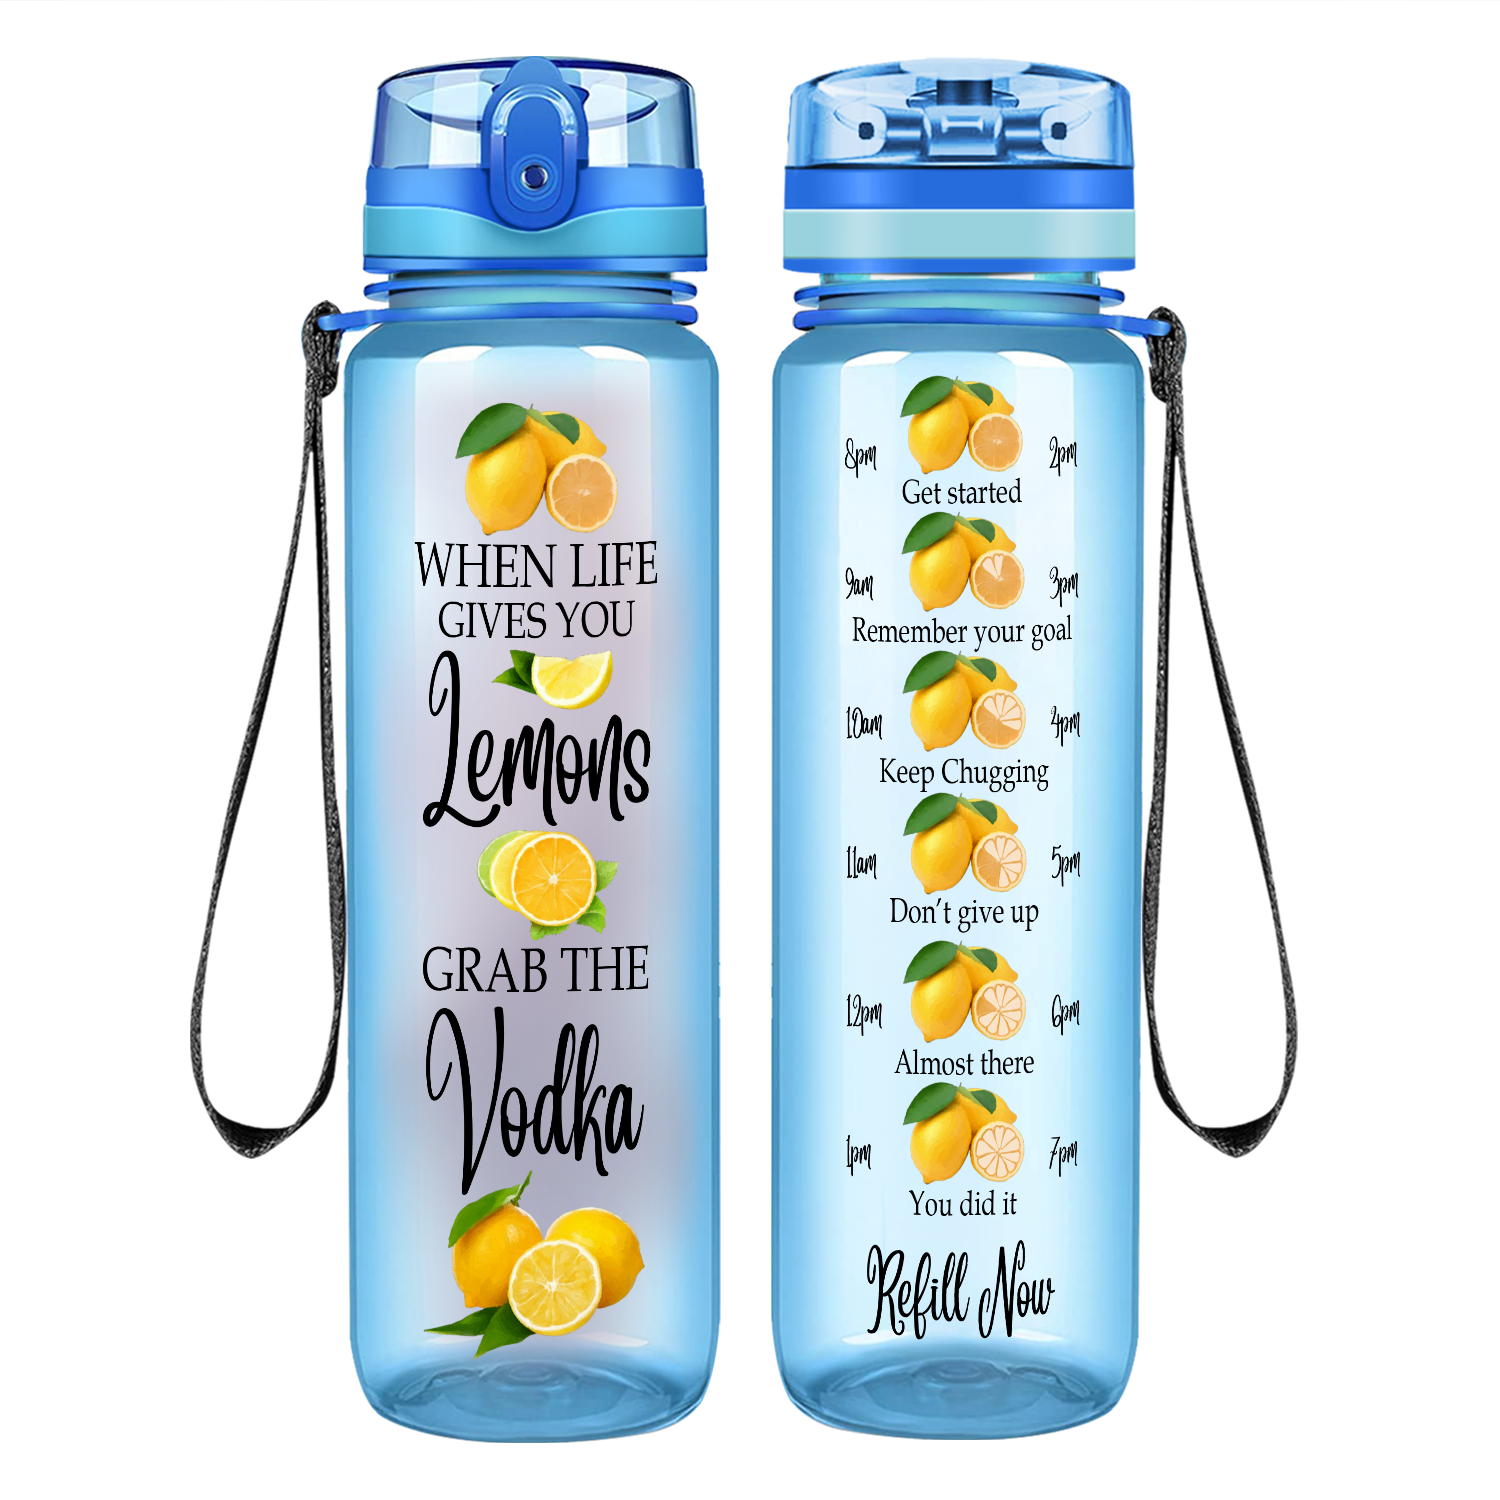 When Life Gives You Lemons on 32 oz Motivational Tracking Water Bottle